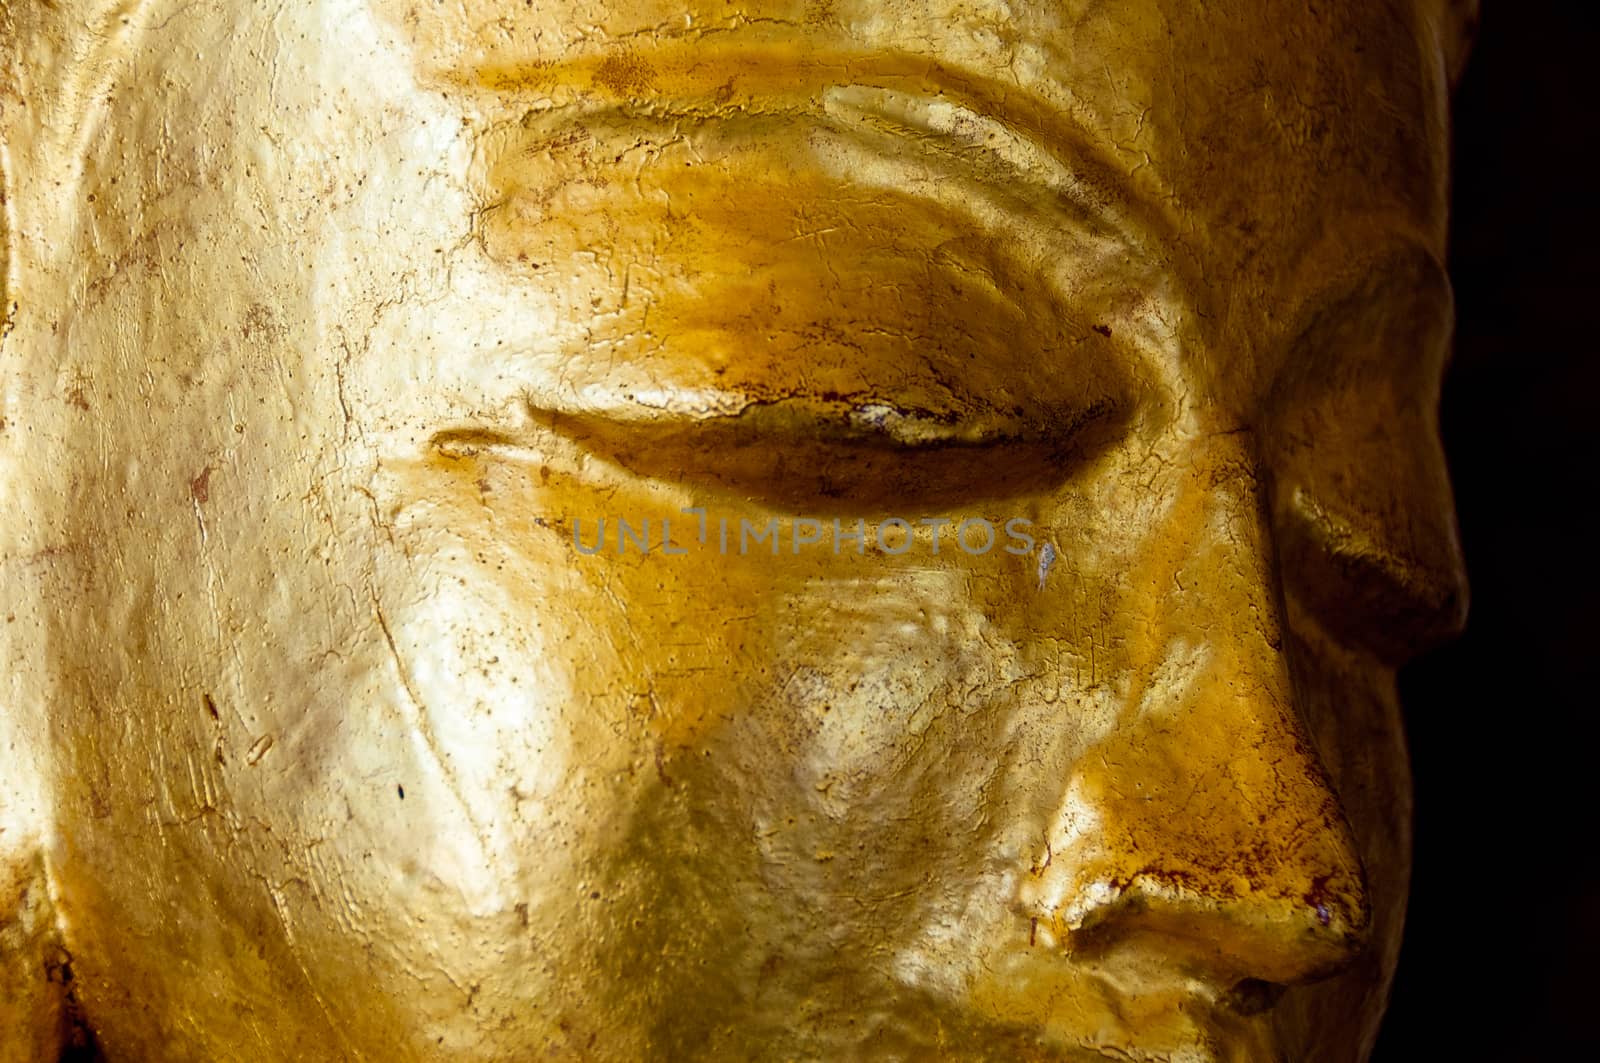 Buddha face gold statue close-up in temple bagan myanmar